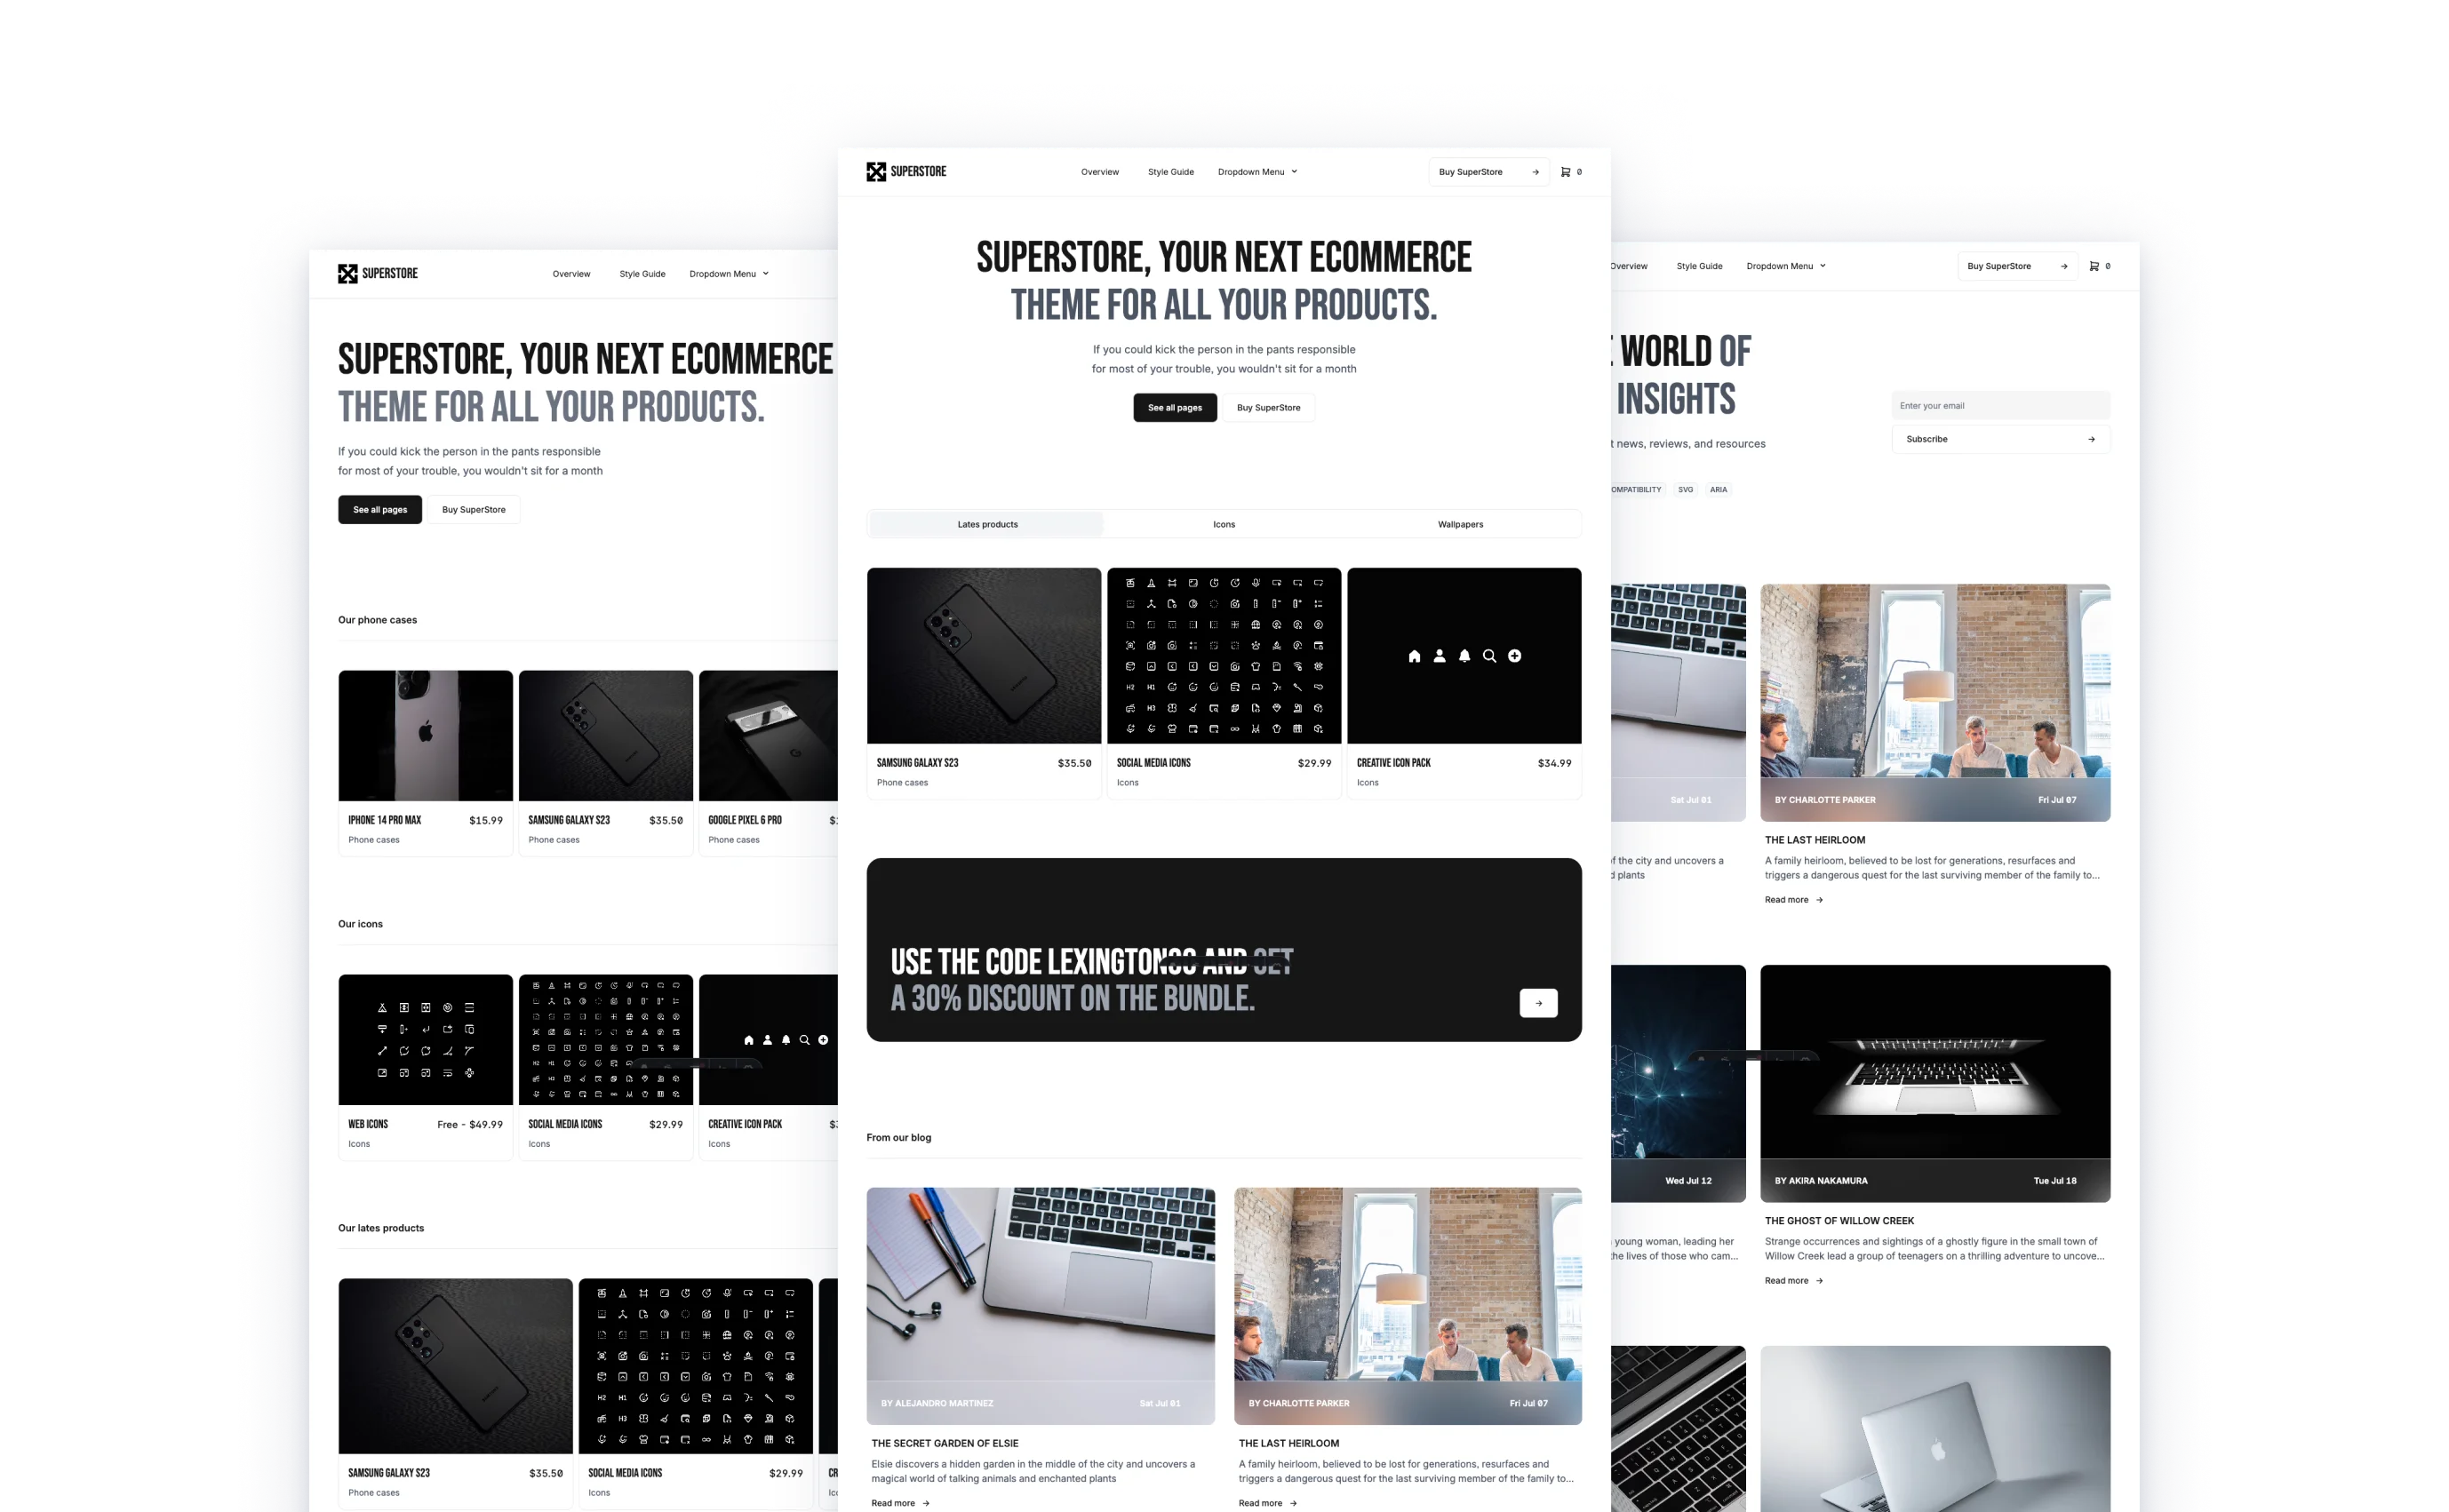 SuperStore ecommerce theme layout, featuring a product page for iPhone 14 Pro Max with images and highlights, a promotional code offer, and a grid of featured electronics products. Another section presents articles on innovation and insights with engaging imagery and article previews.